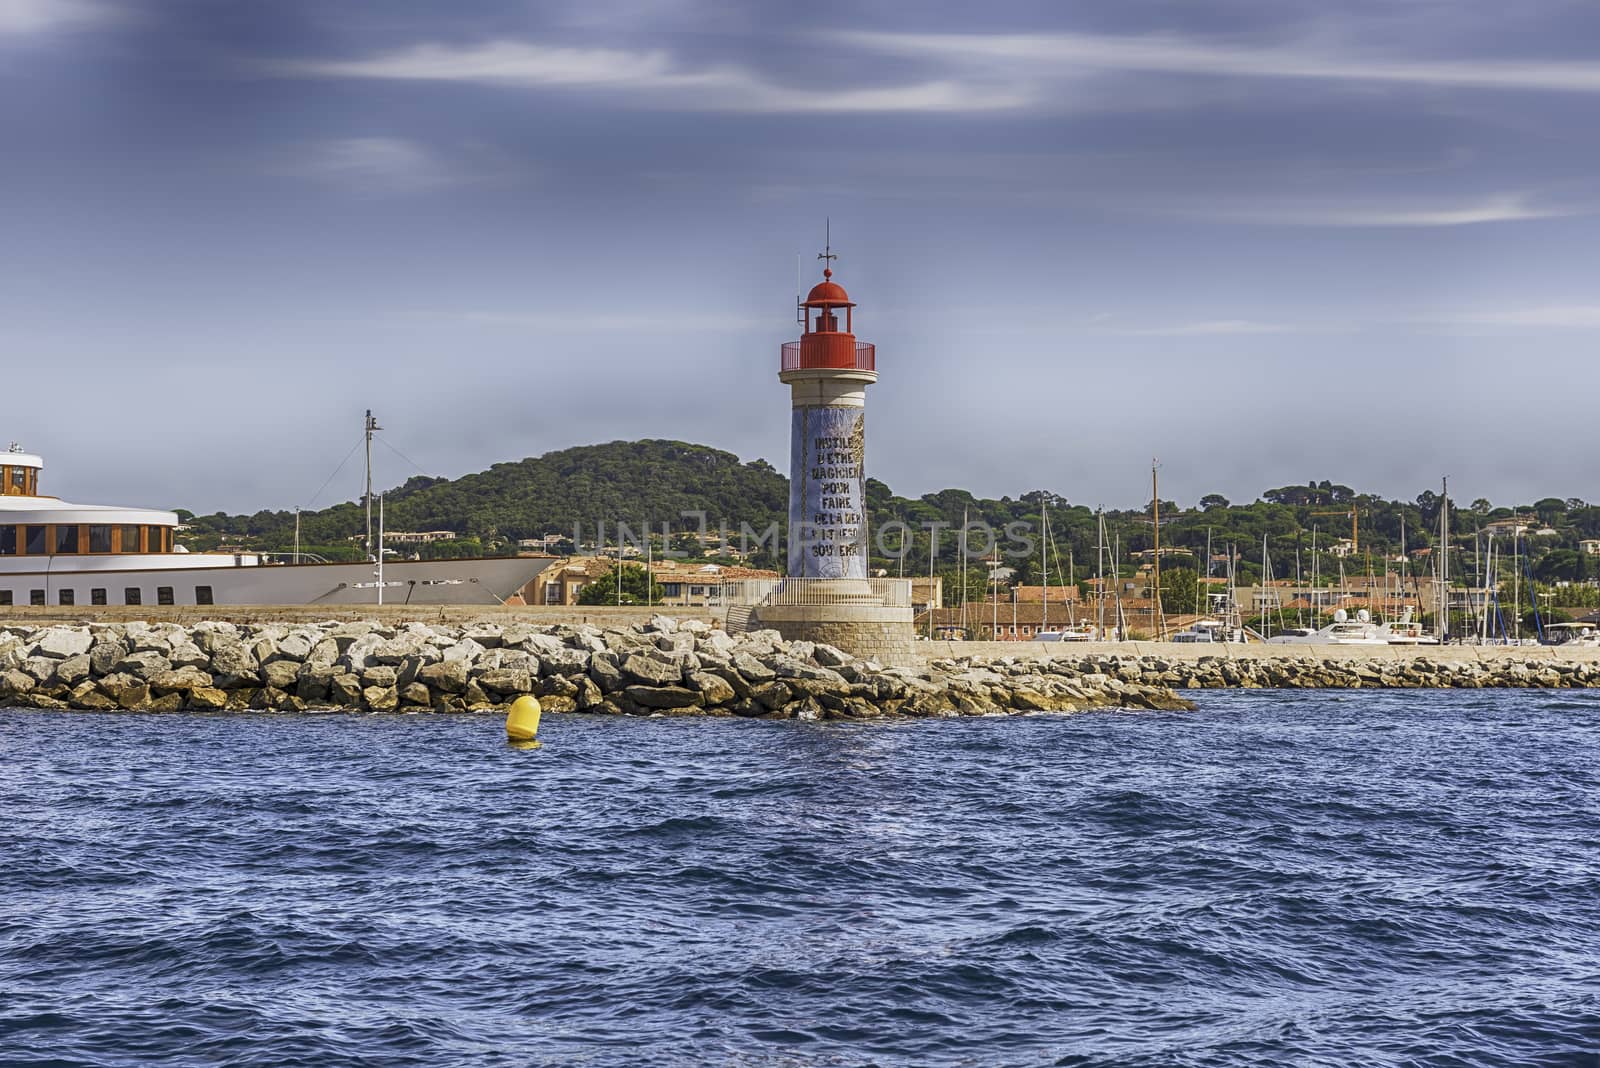 Iconic lighthouse in the harbor of Saint-Tropez, Cote d'Azur, Fr by marcorubino